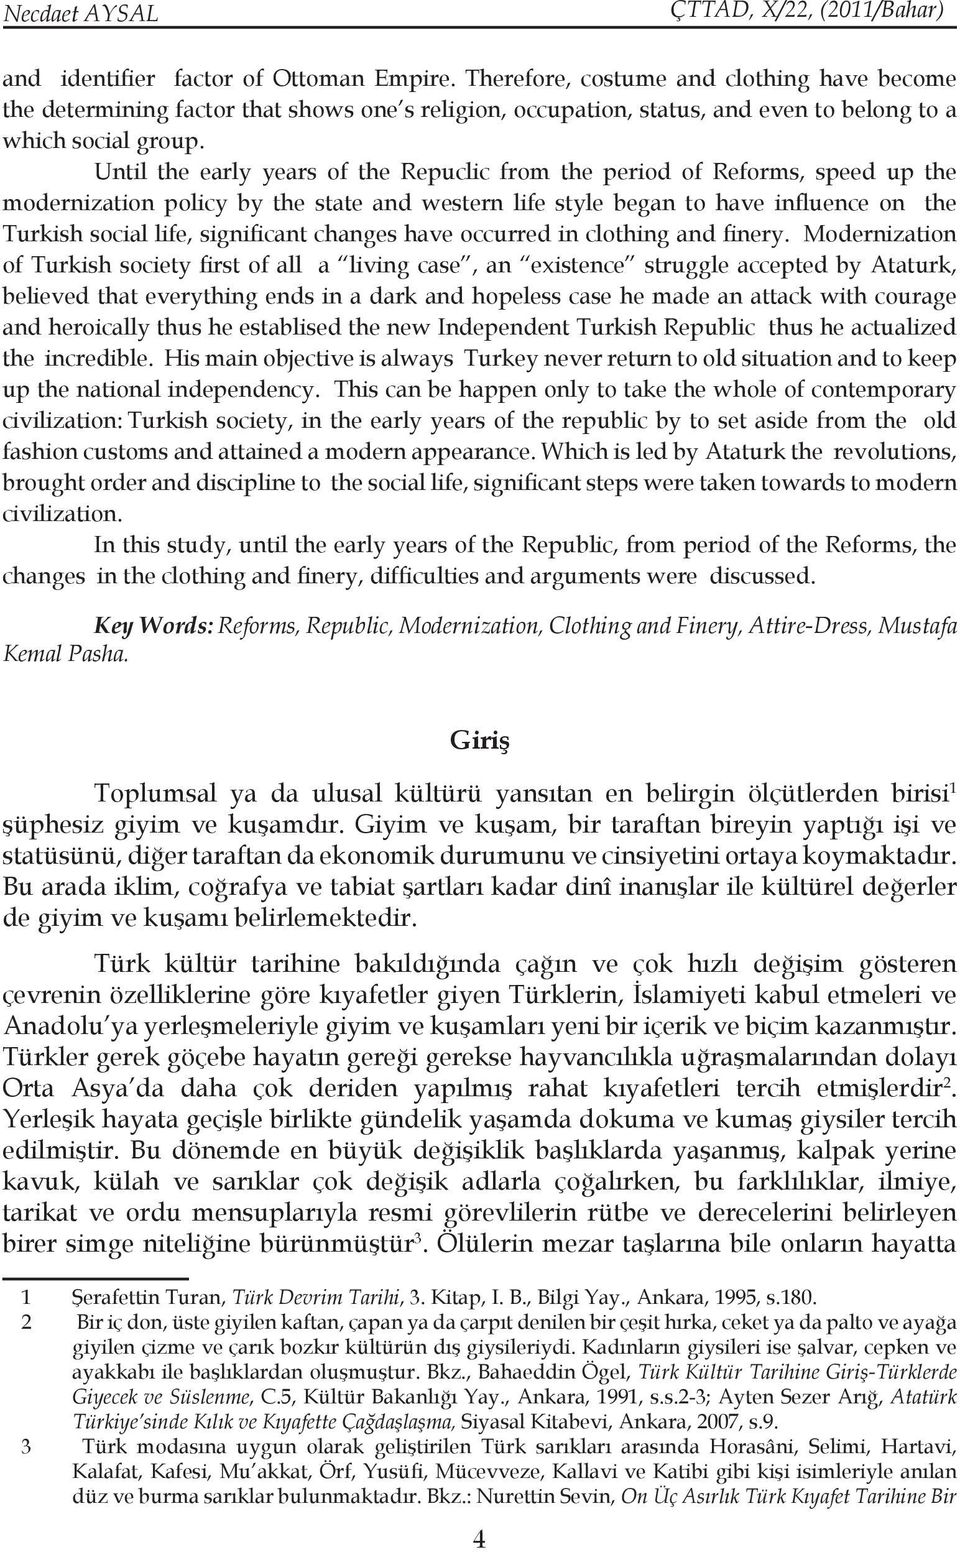 Until the early years of the Repuclic from the period of Reforms, speed up the modernization policy by the state and western life style began to have influence on the Turkish social life, significant